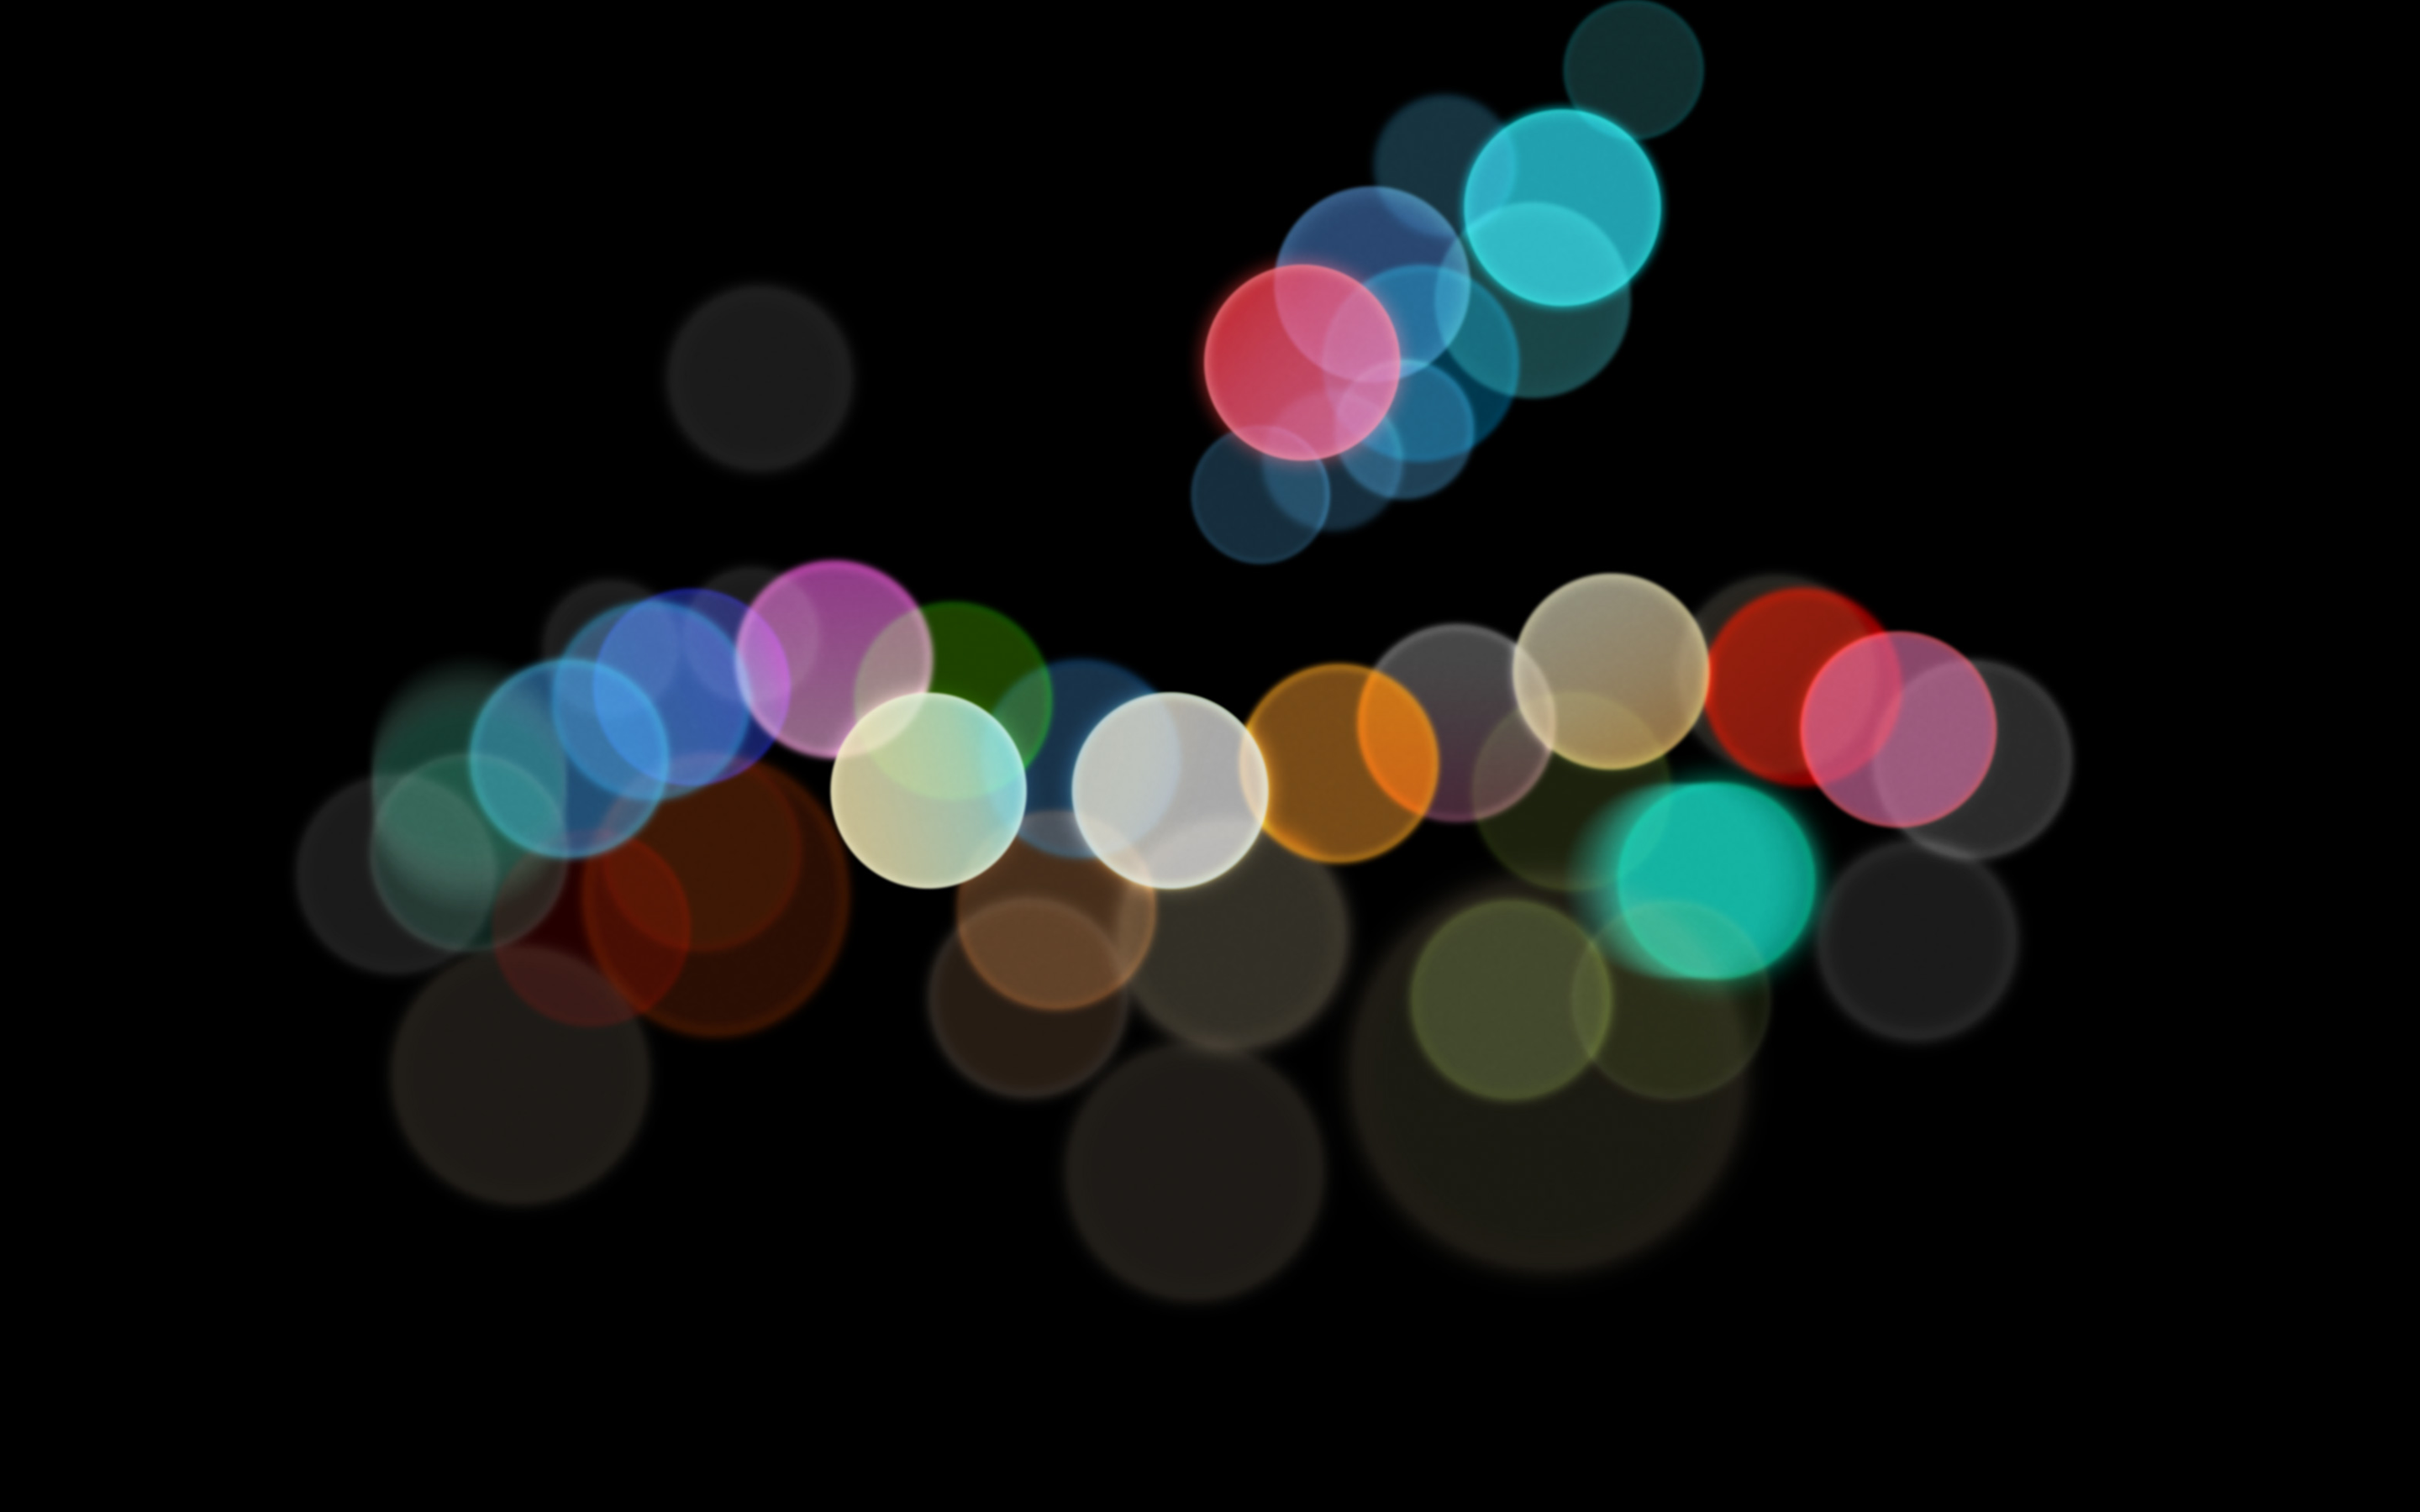 Apple event wallpapers: “See you on the 7th” - AppleWorldHellas